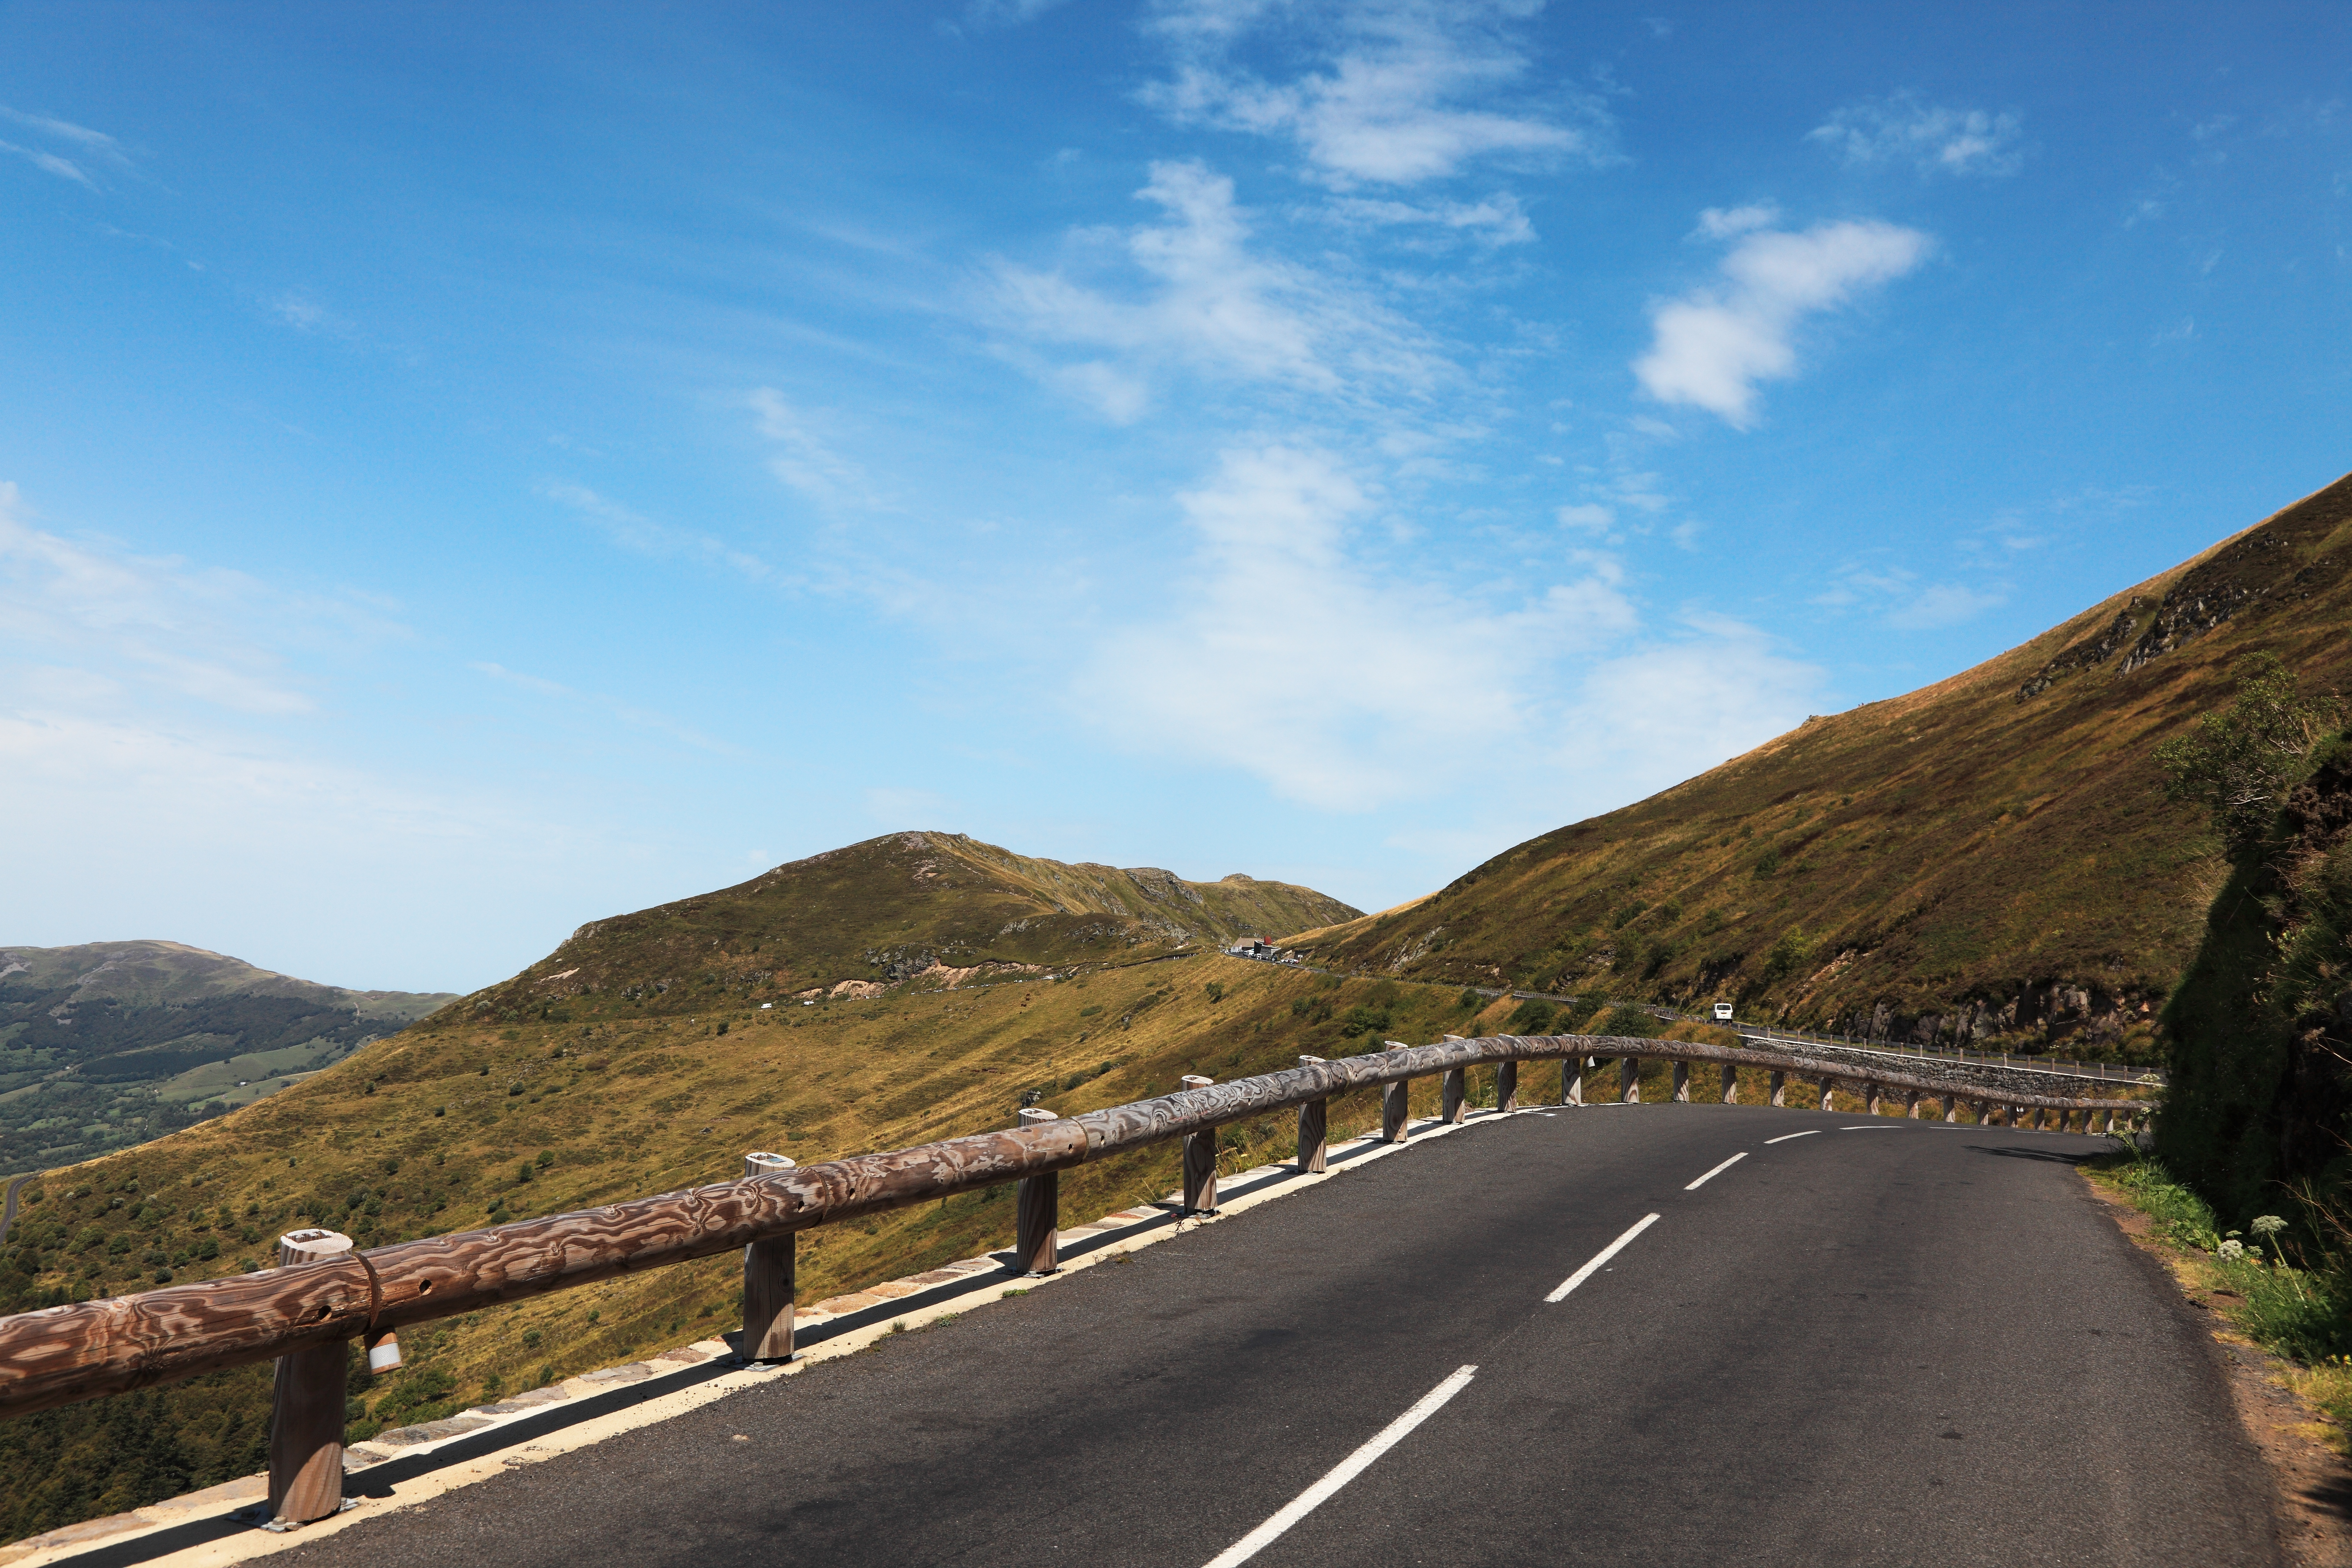 Image Of A Mountain Road (to Pas De Peyrol- 1589m ) Located In The Central Massif In Auvergne Region Of France. This Is Is The Highest Road In This Massif And It Is A Traditional Route For The Tour Of France (the Biggest Cycling Race In The World).